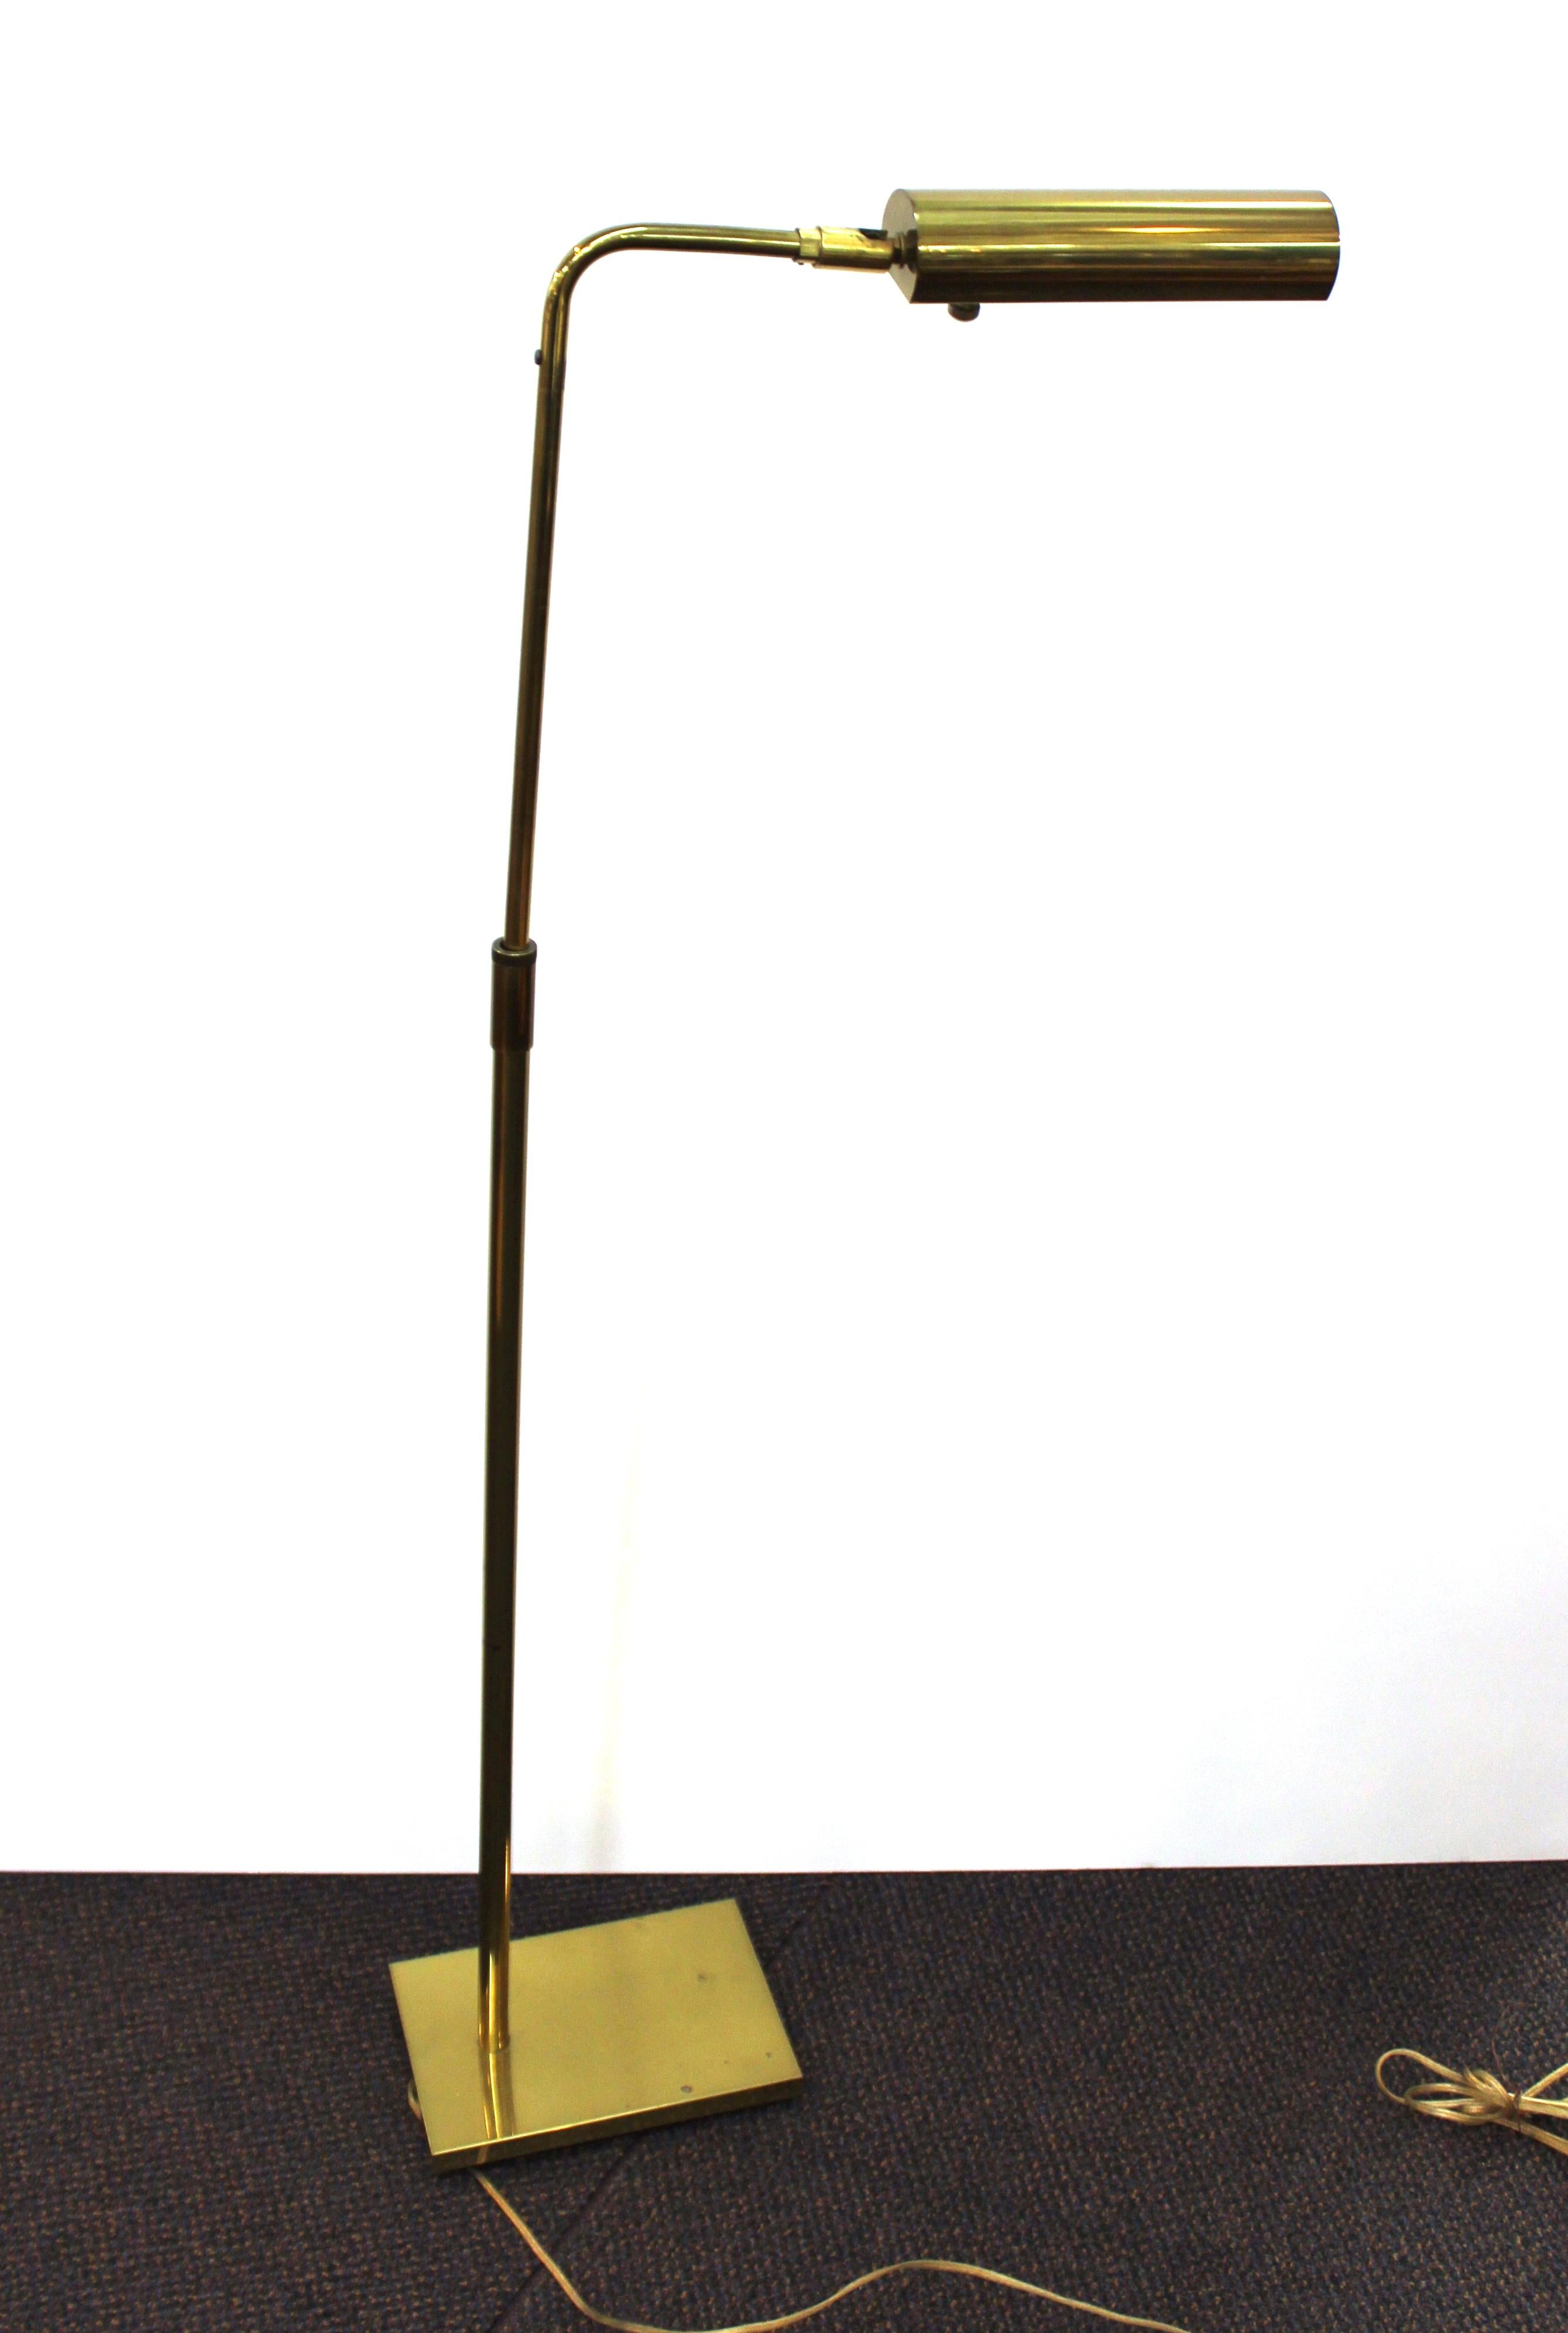 Mid-Century Modern adjustable pharmacy floor lamp in brass, made by Koch & Lowy in the United States during the 1960s. The piece is in great vintage condition with some minor age-appropriate wear. Stamped on the upper neck 'Koch & Lowy'.